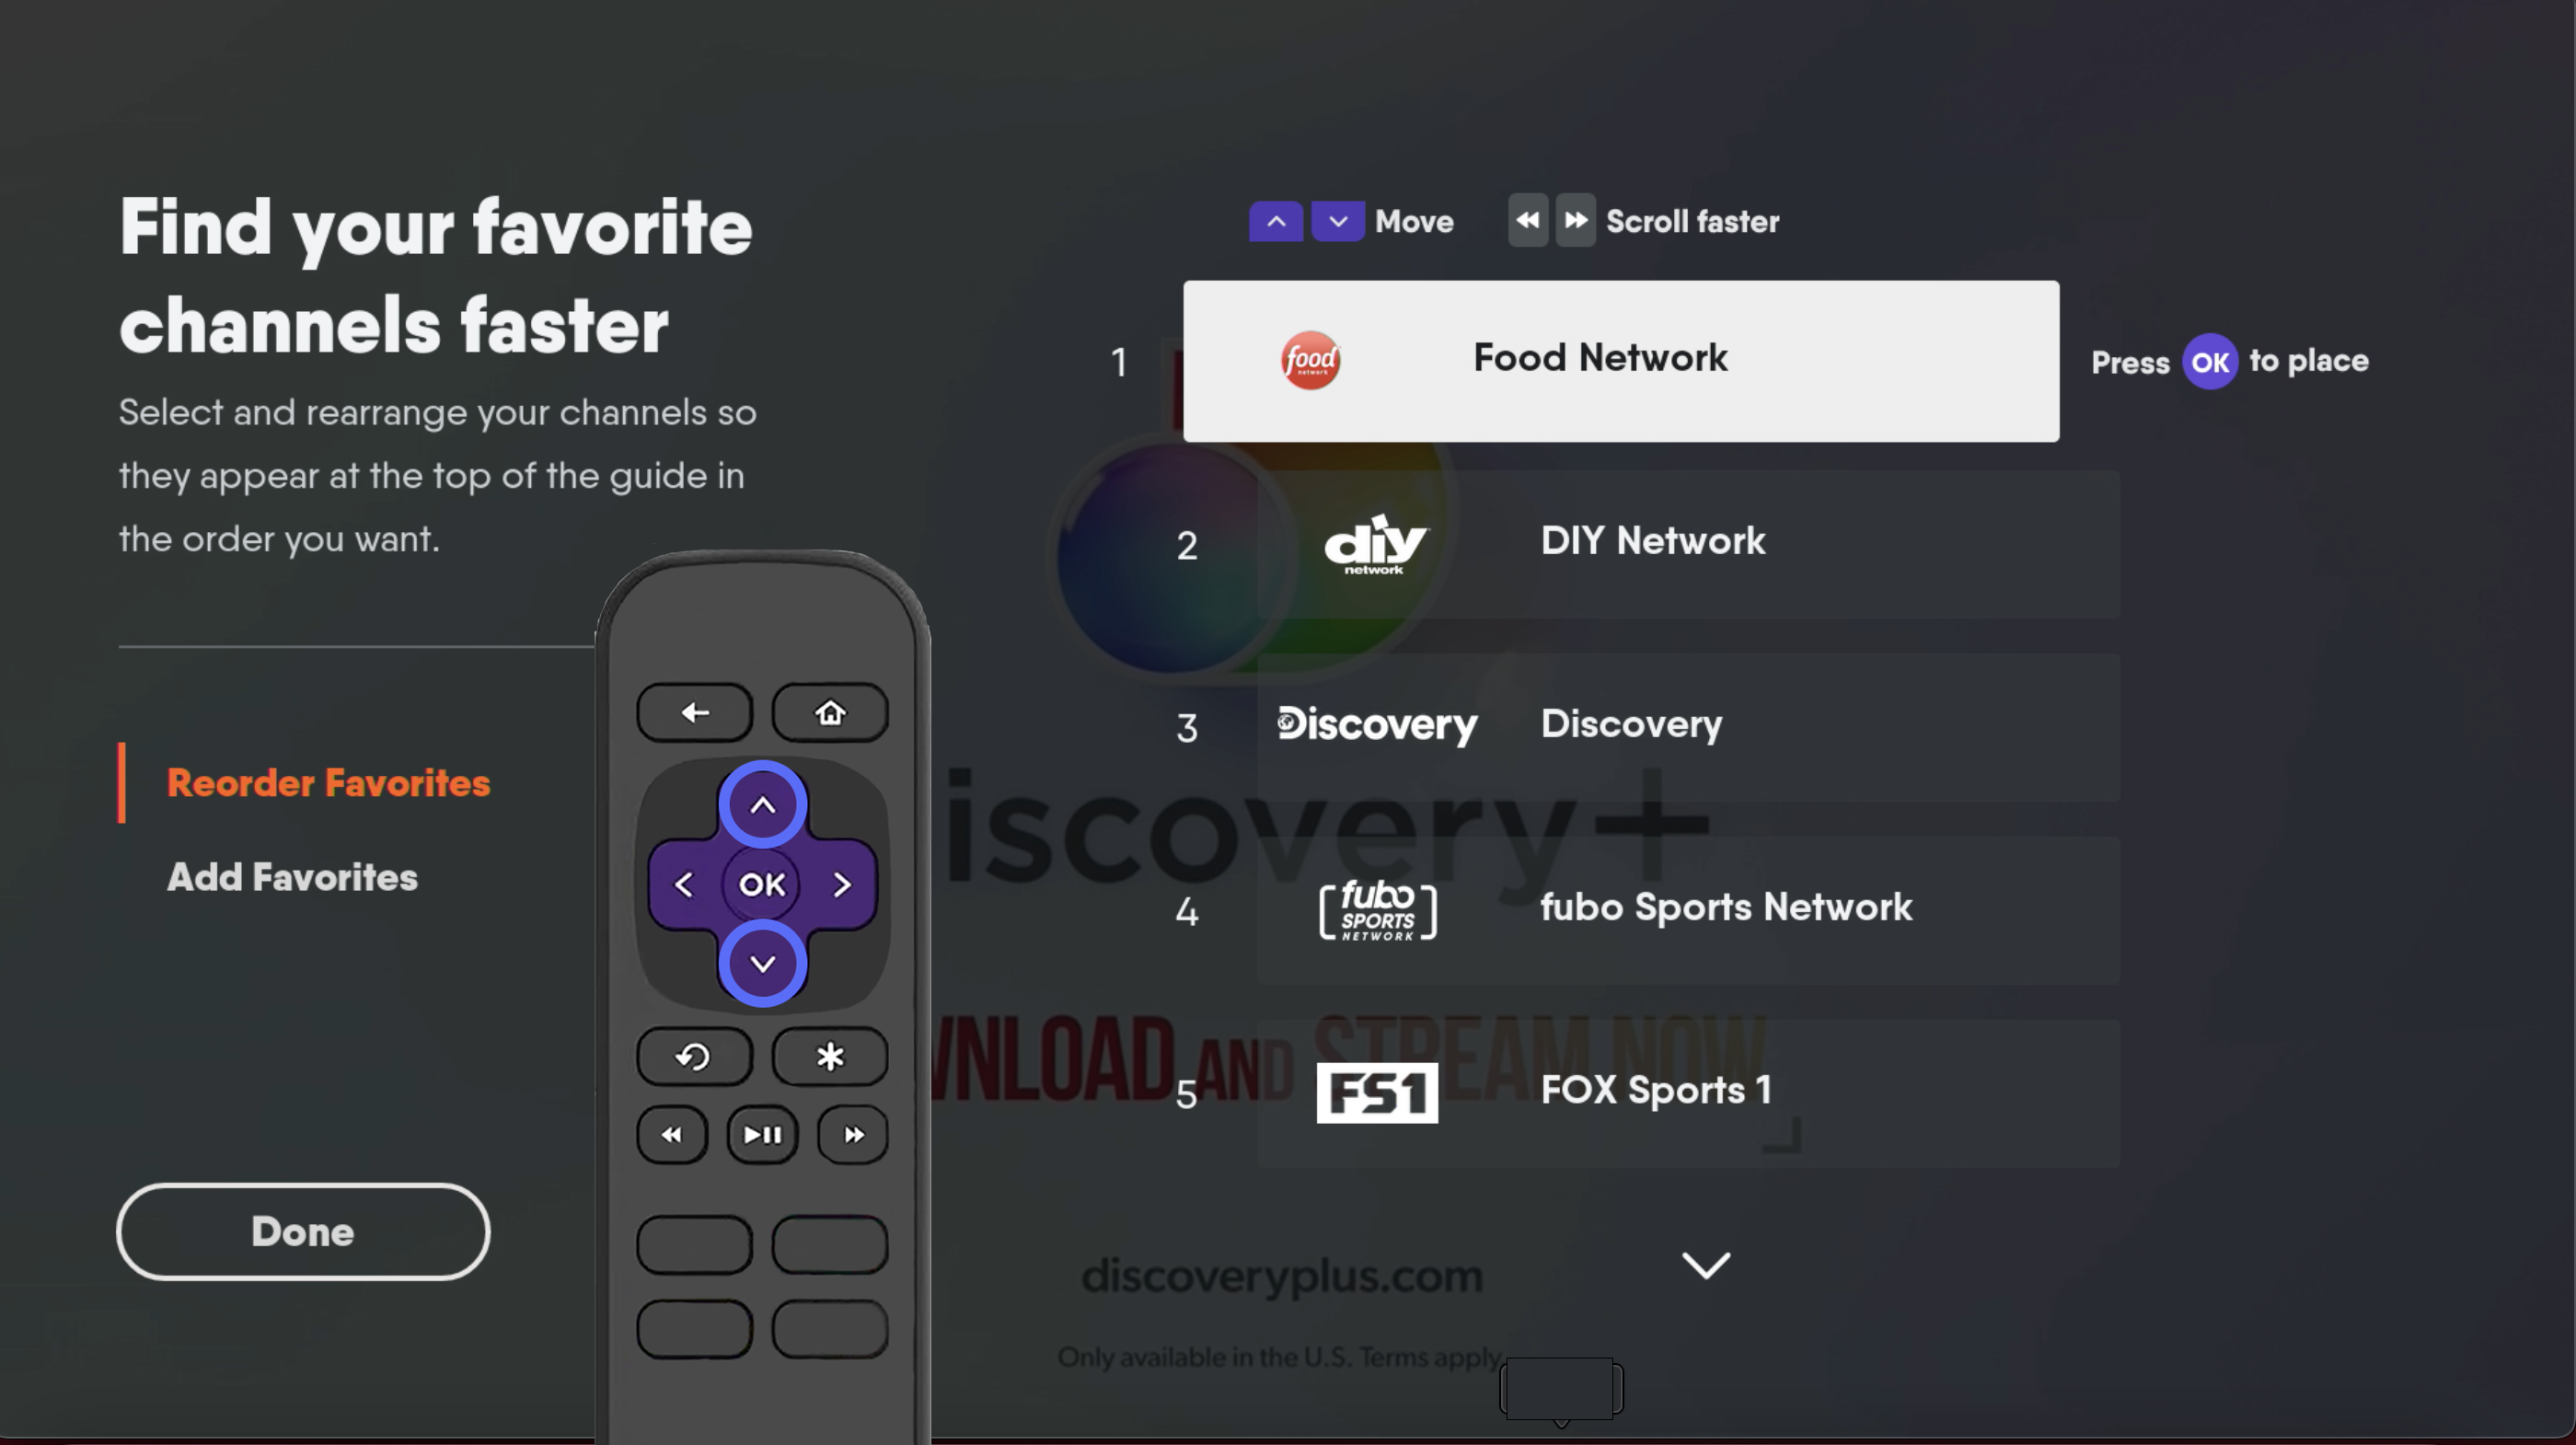 Reordering a favorite channel on the FuboTV app for Roku using the UP or DOWN arrows on the remote